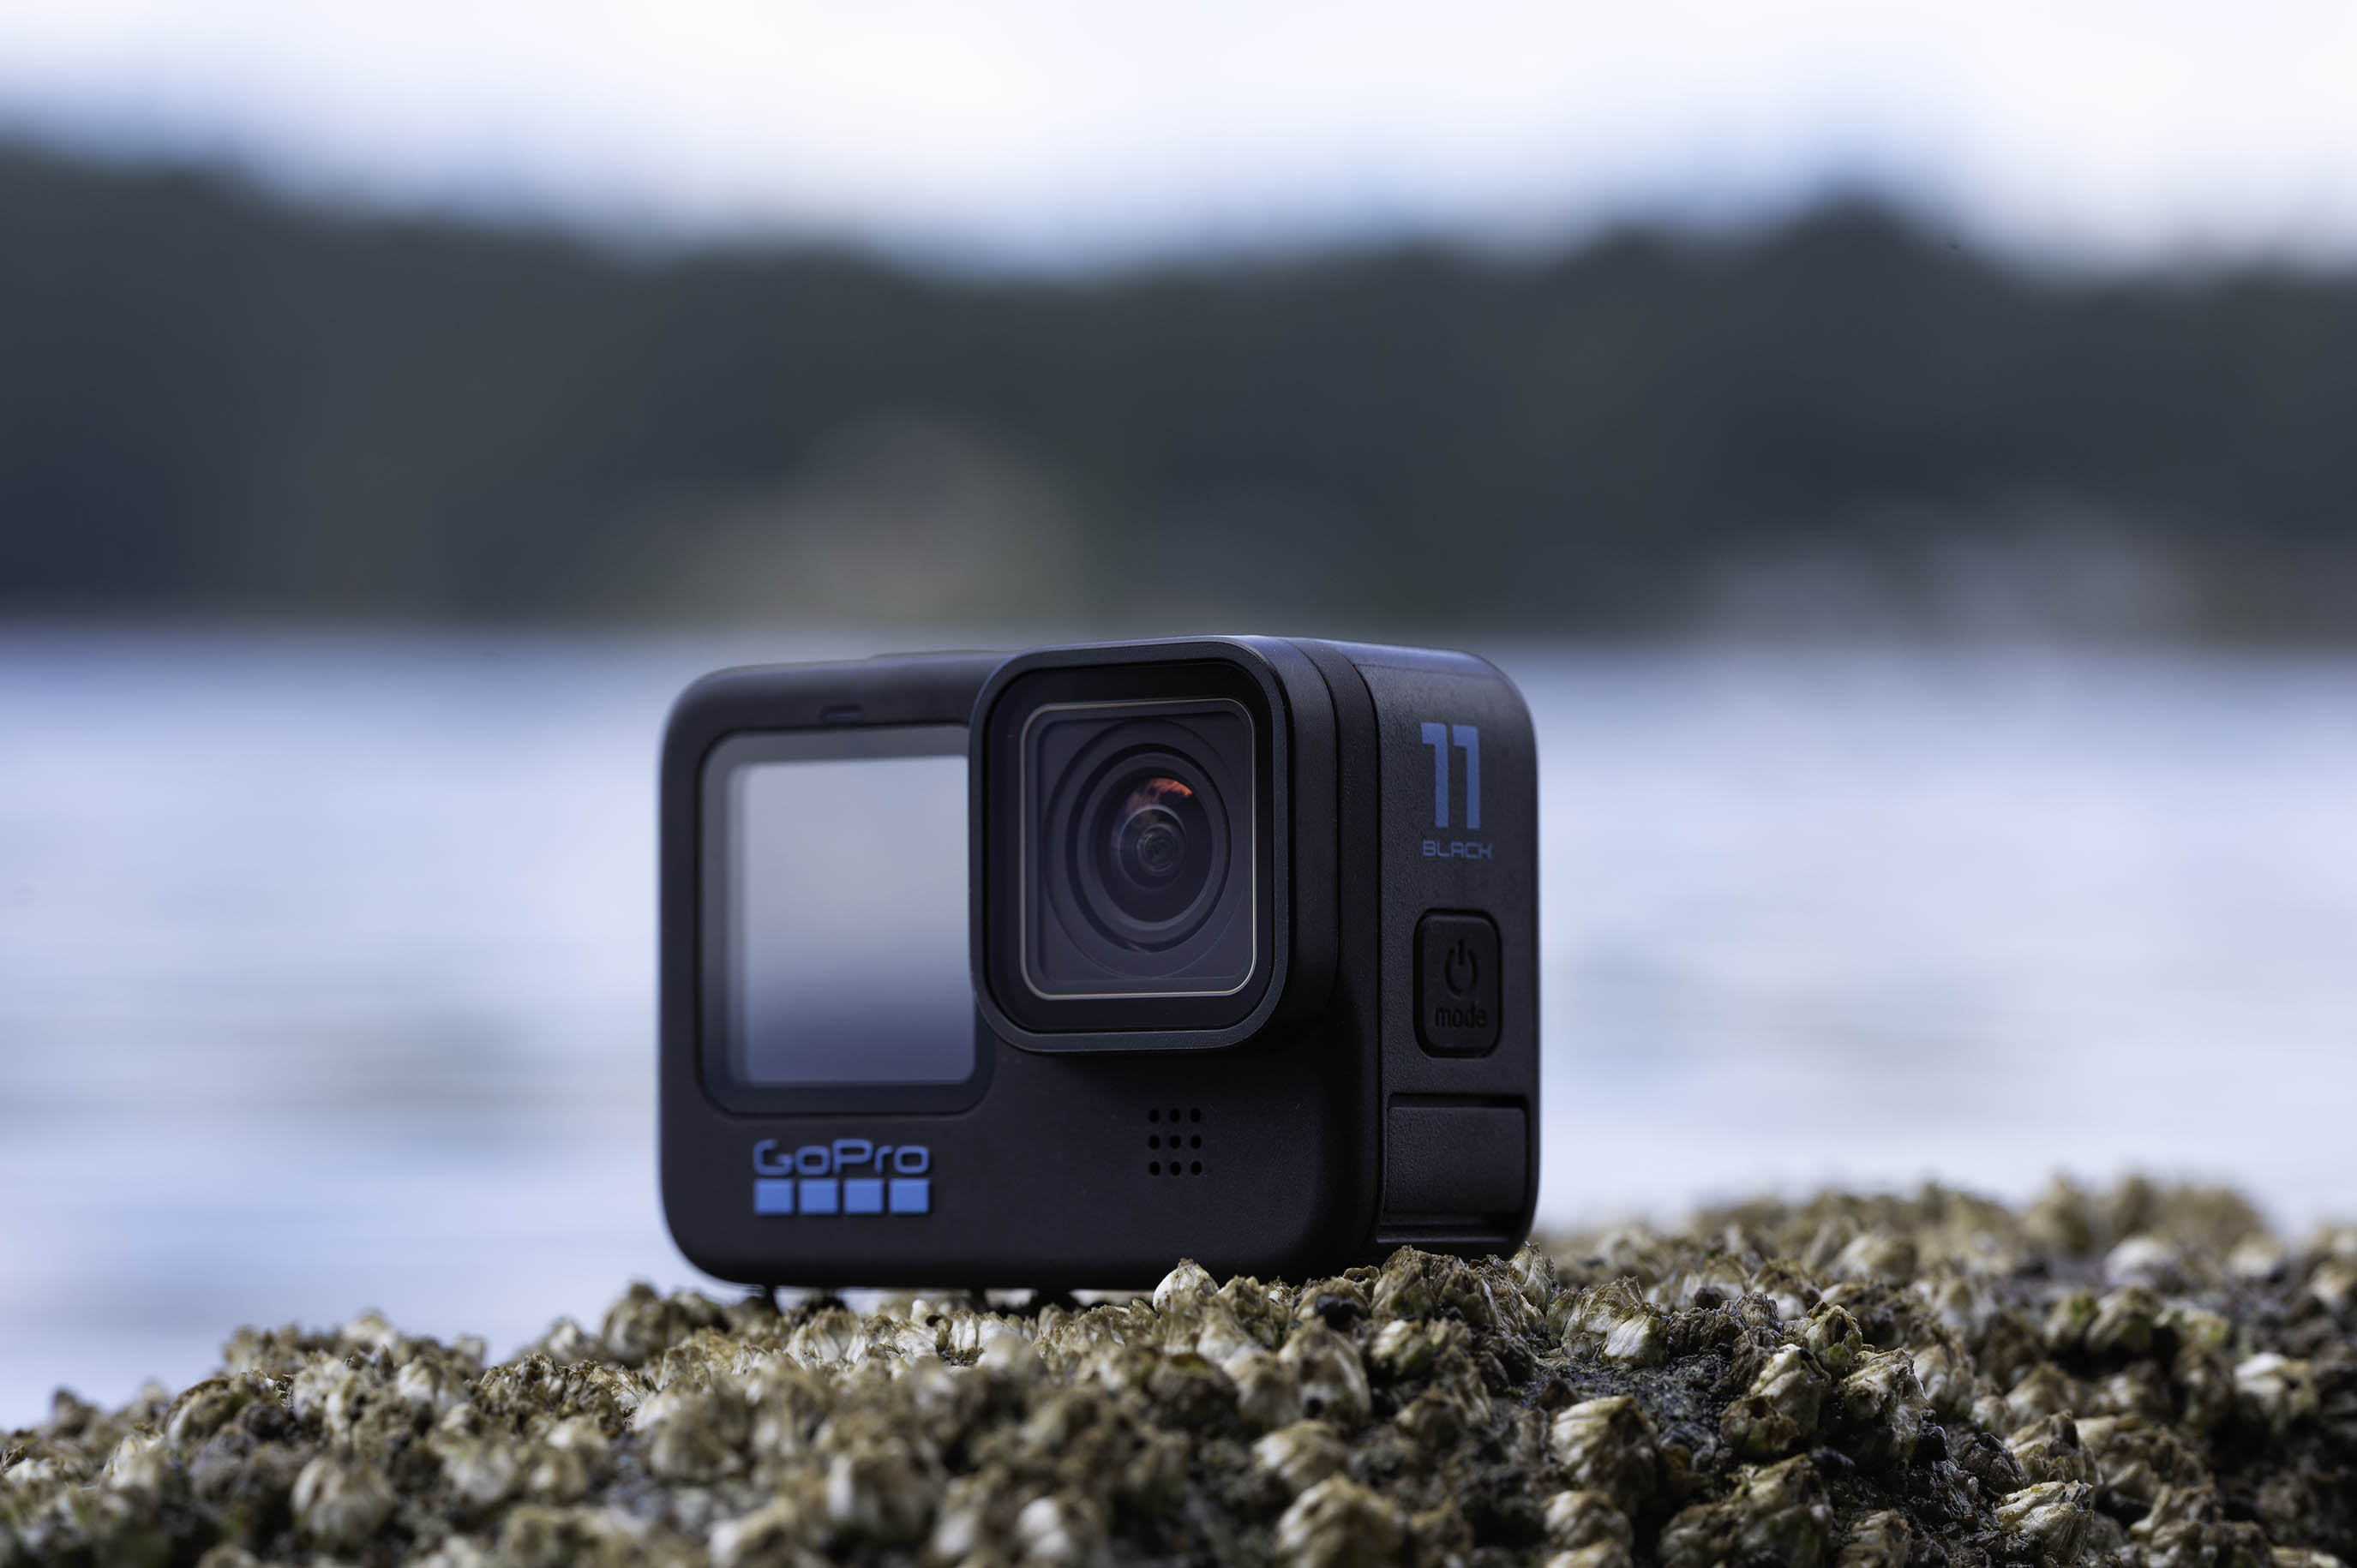 Review: GoPro HERO12 Black—Worthy for FPV Drones? Better than OSMO